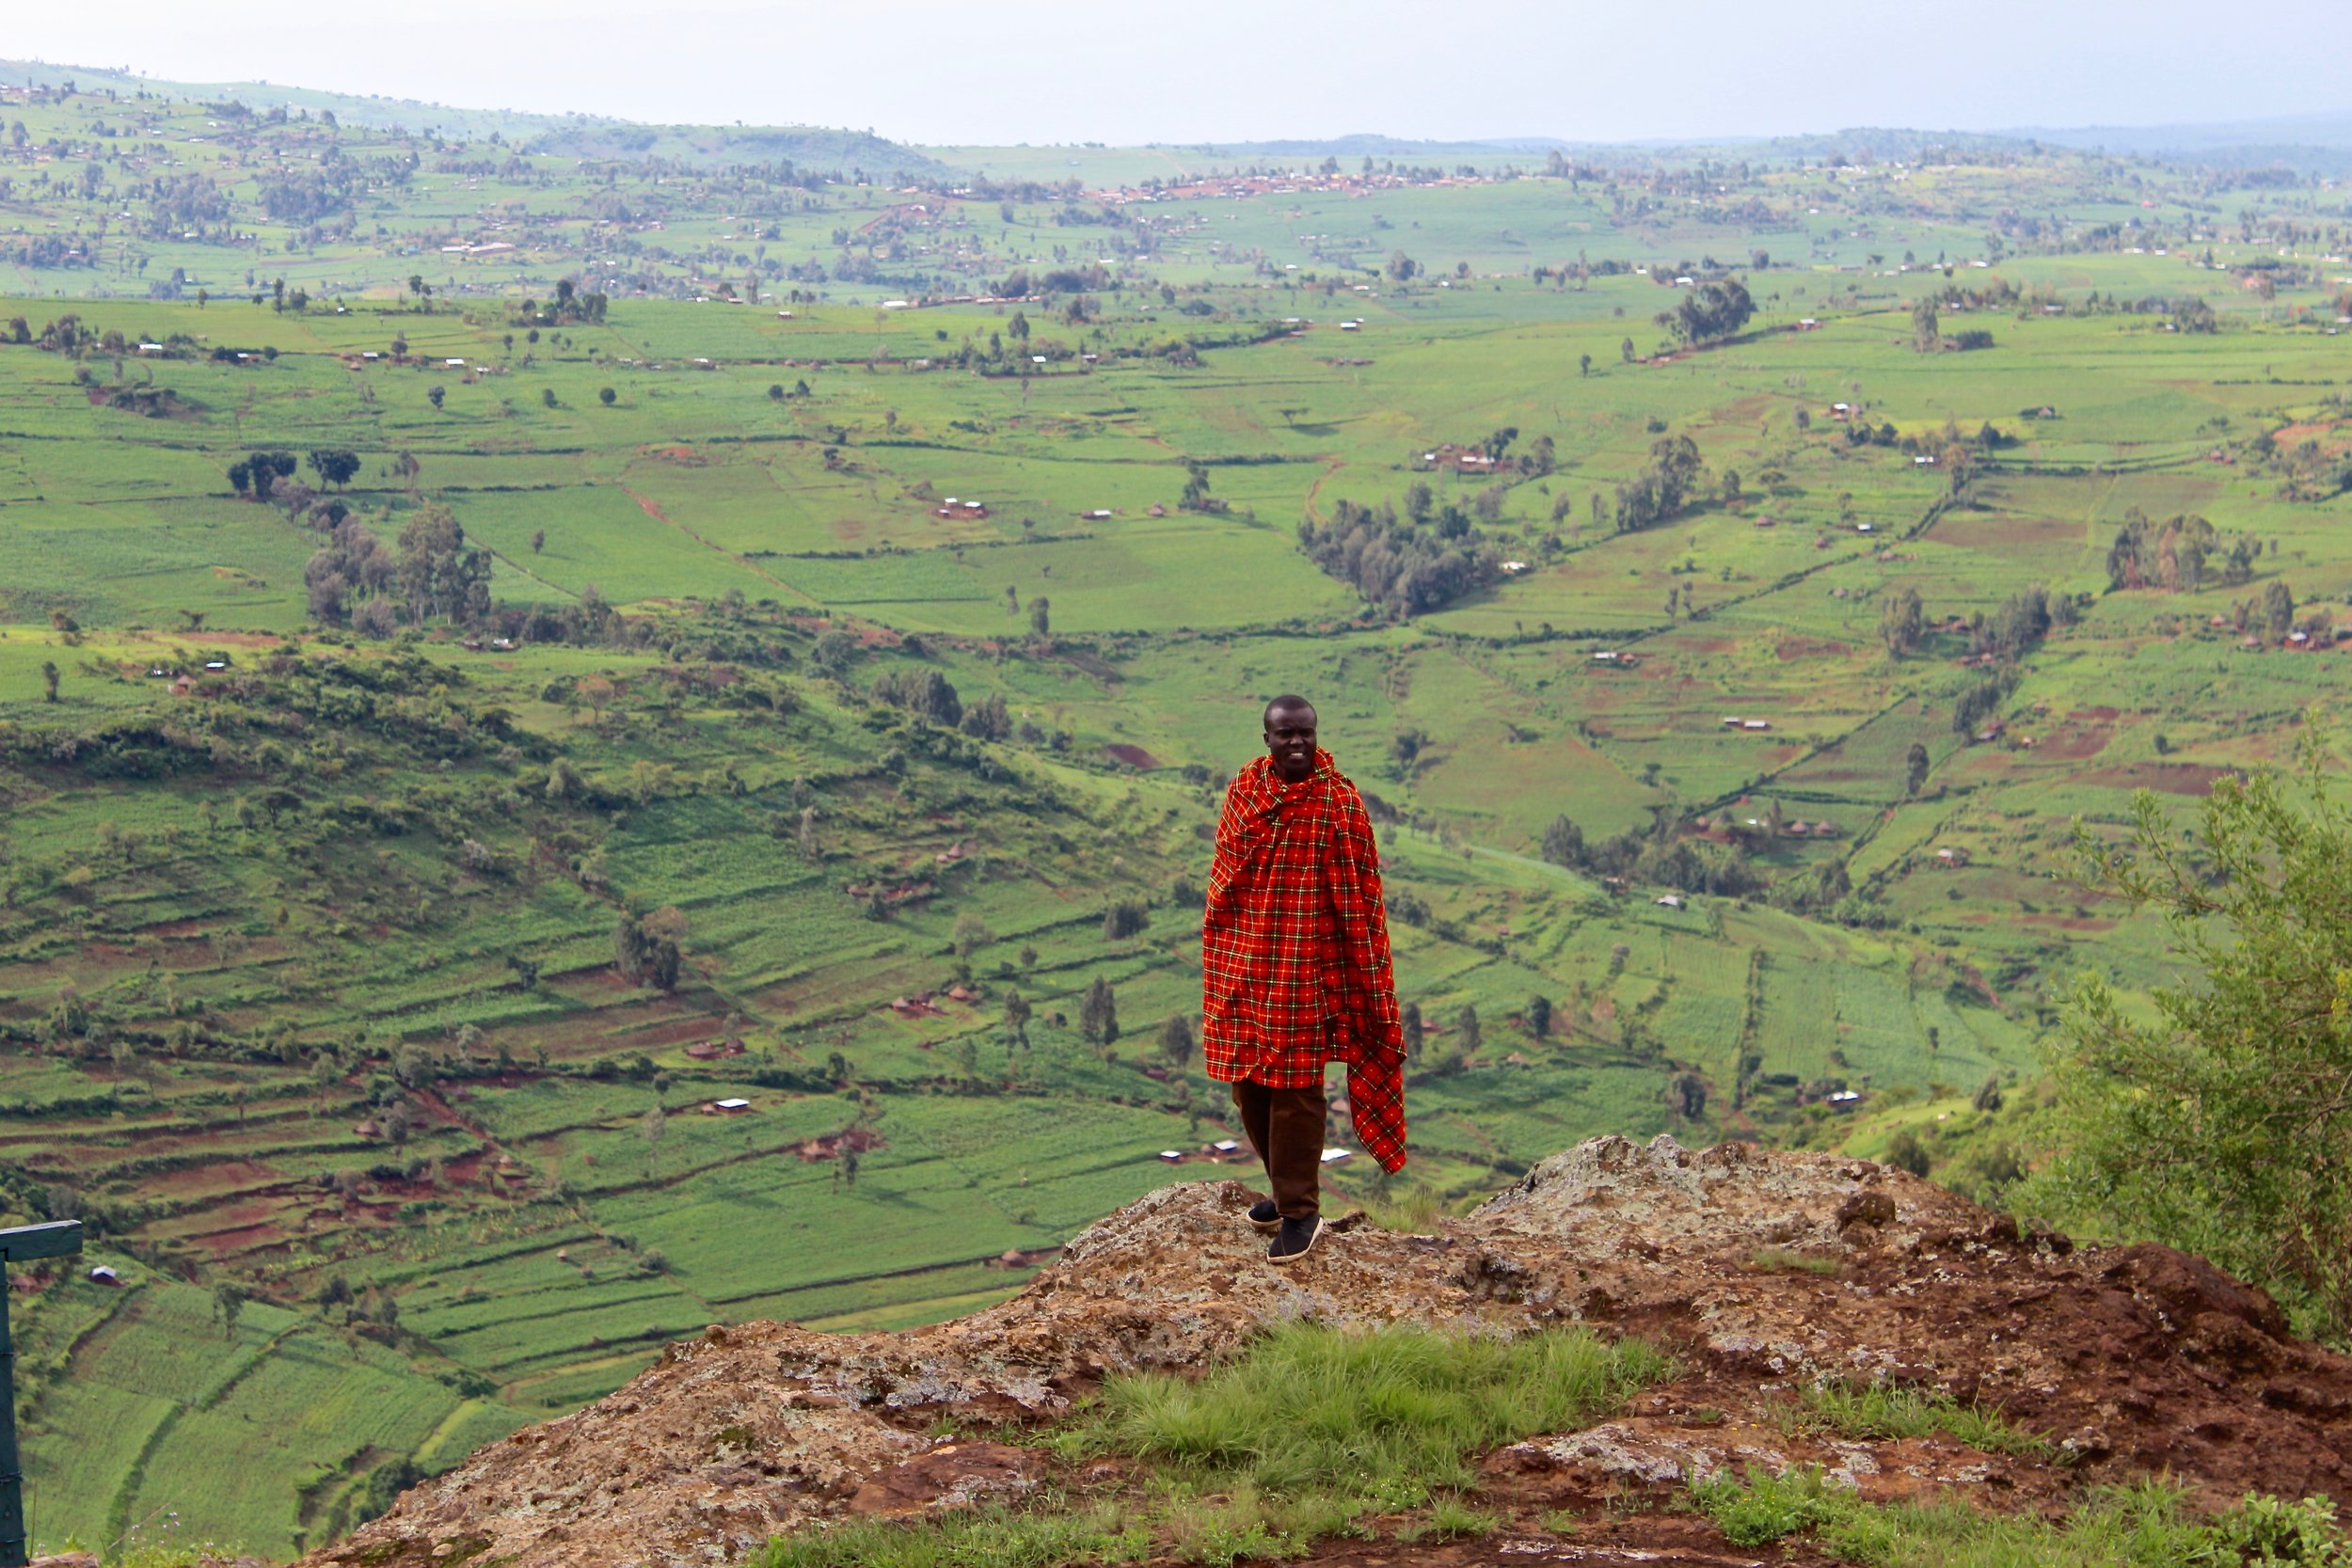  This was our favorite overlook at Mt. Elgon. Livingstone is posed with the Kenyan countryside in the background. If you look closely, you can see fields and houses. 